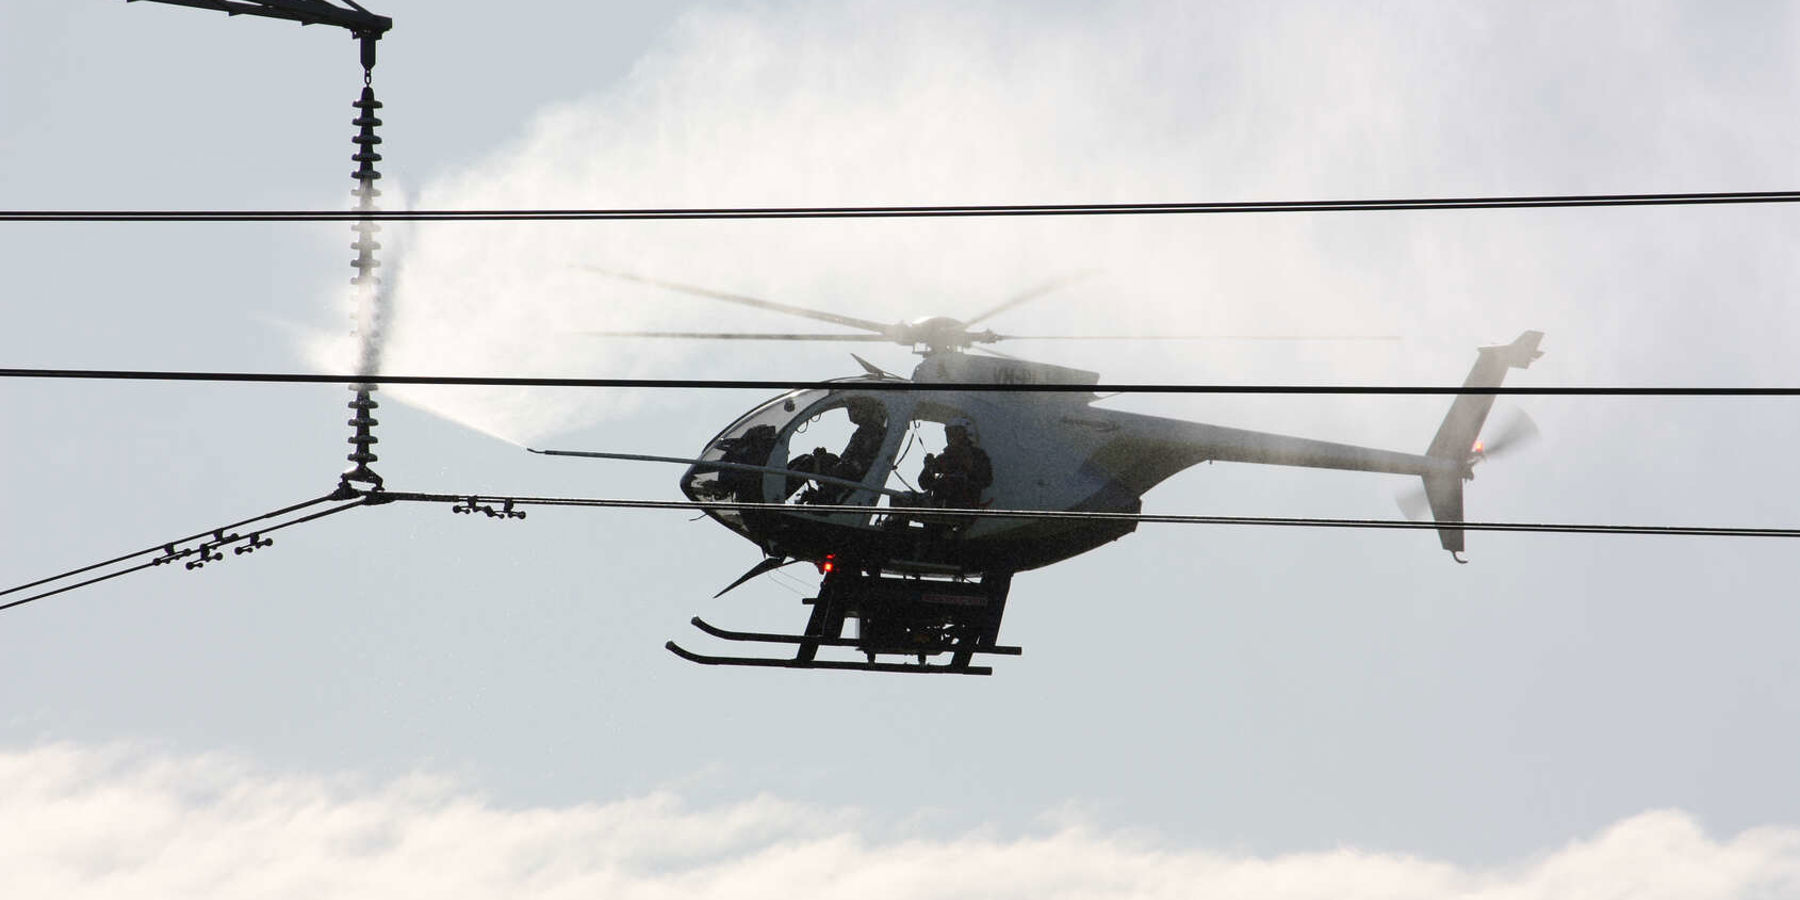 A helicopter carry out line washing on some electricity lines